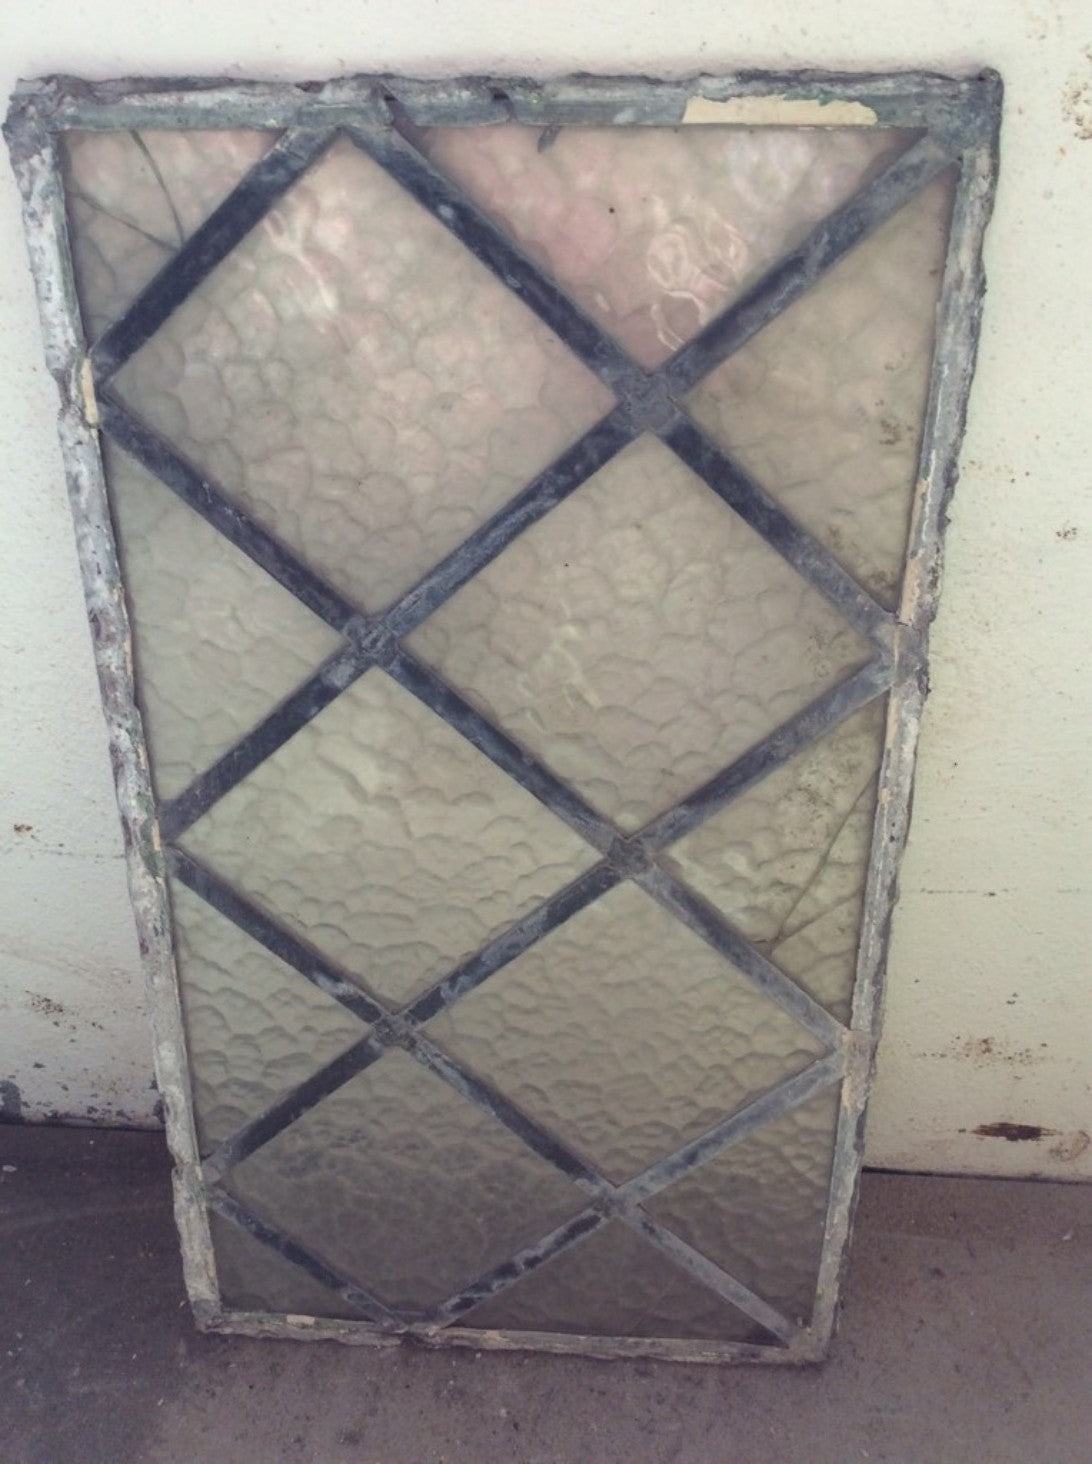 39.7cm By 22.5cm Salvaged Old Antique Translucent Glass Leaded Window 14 Panes